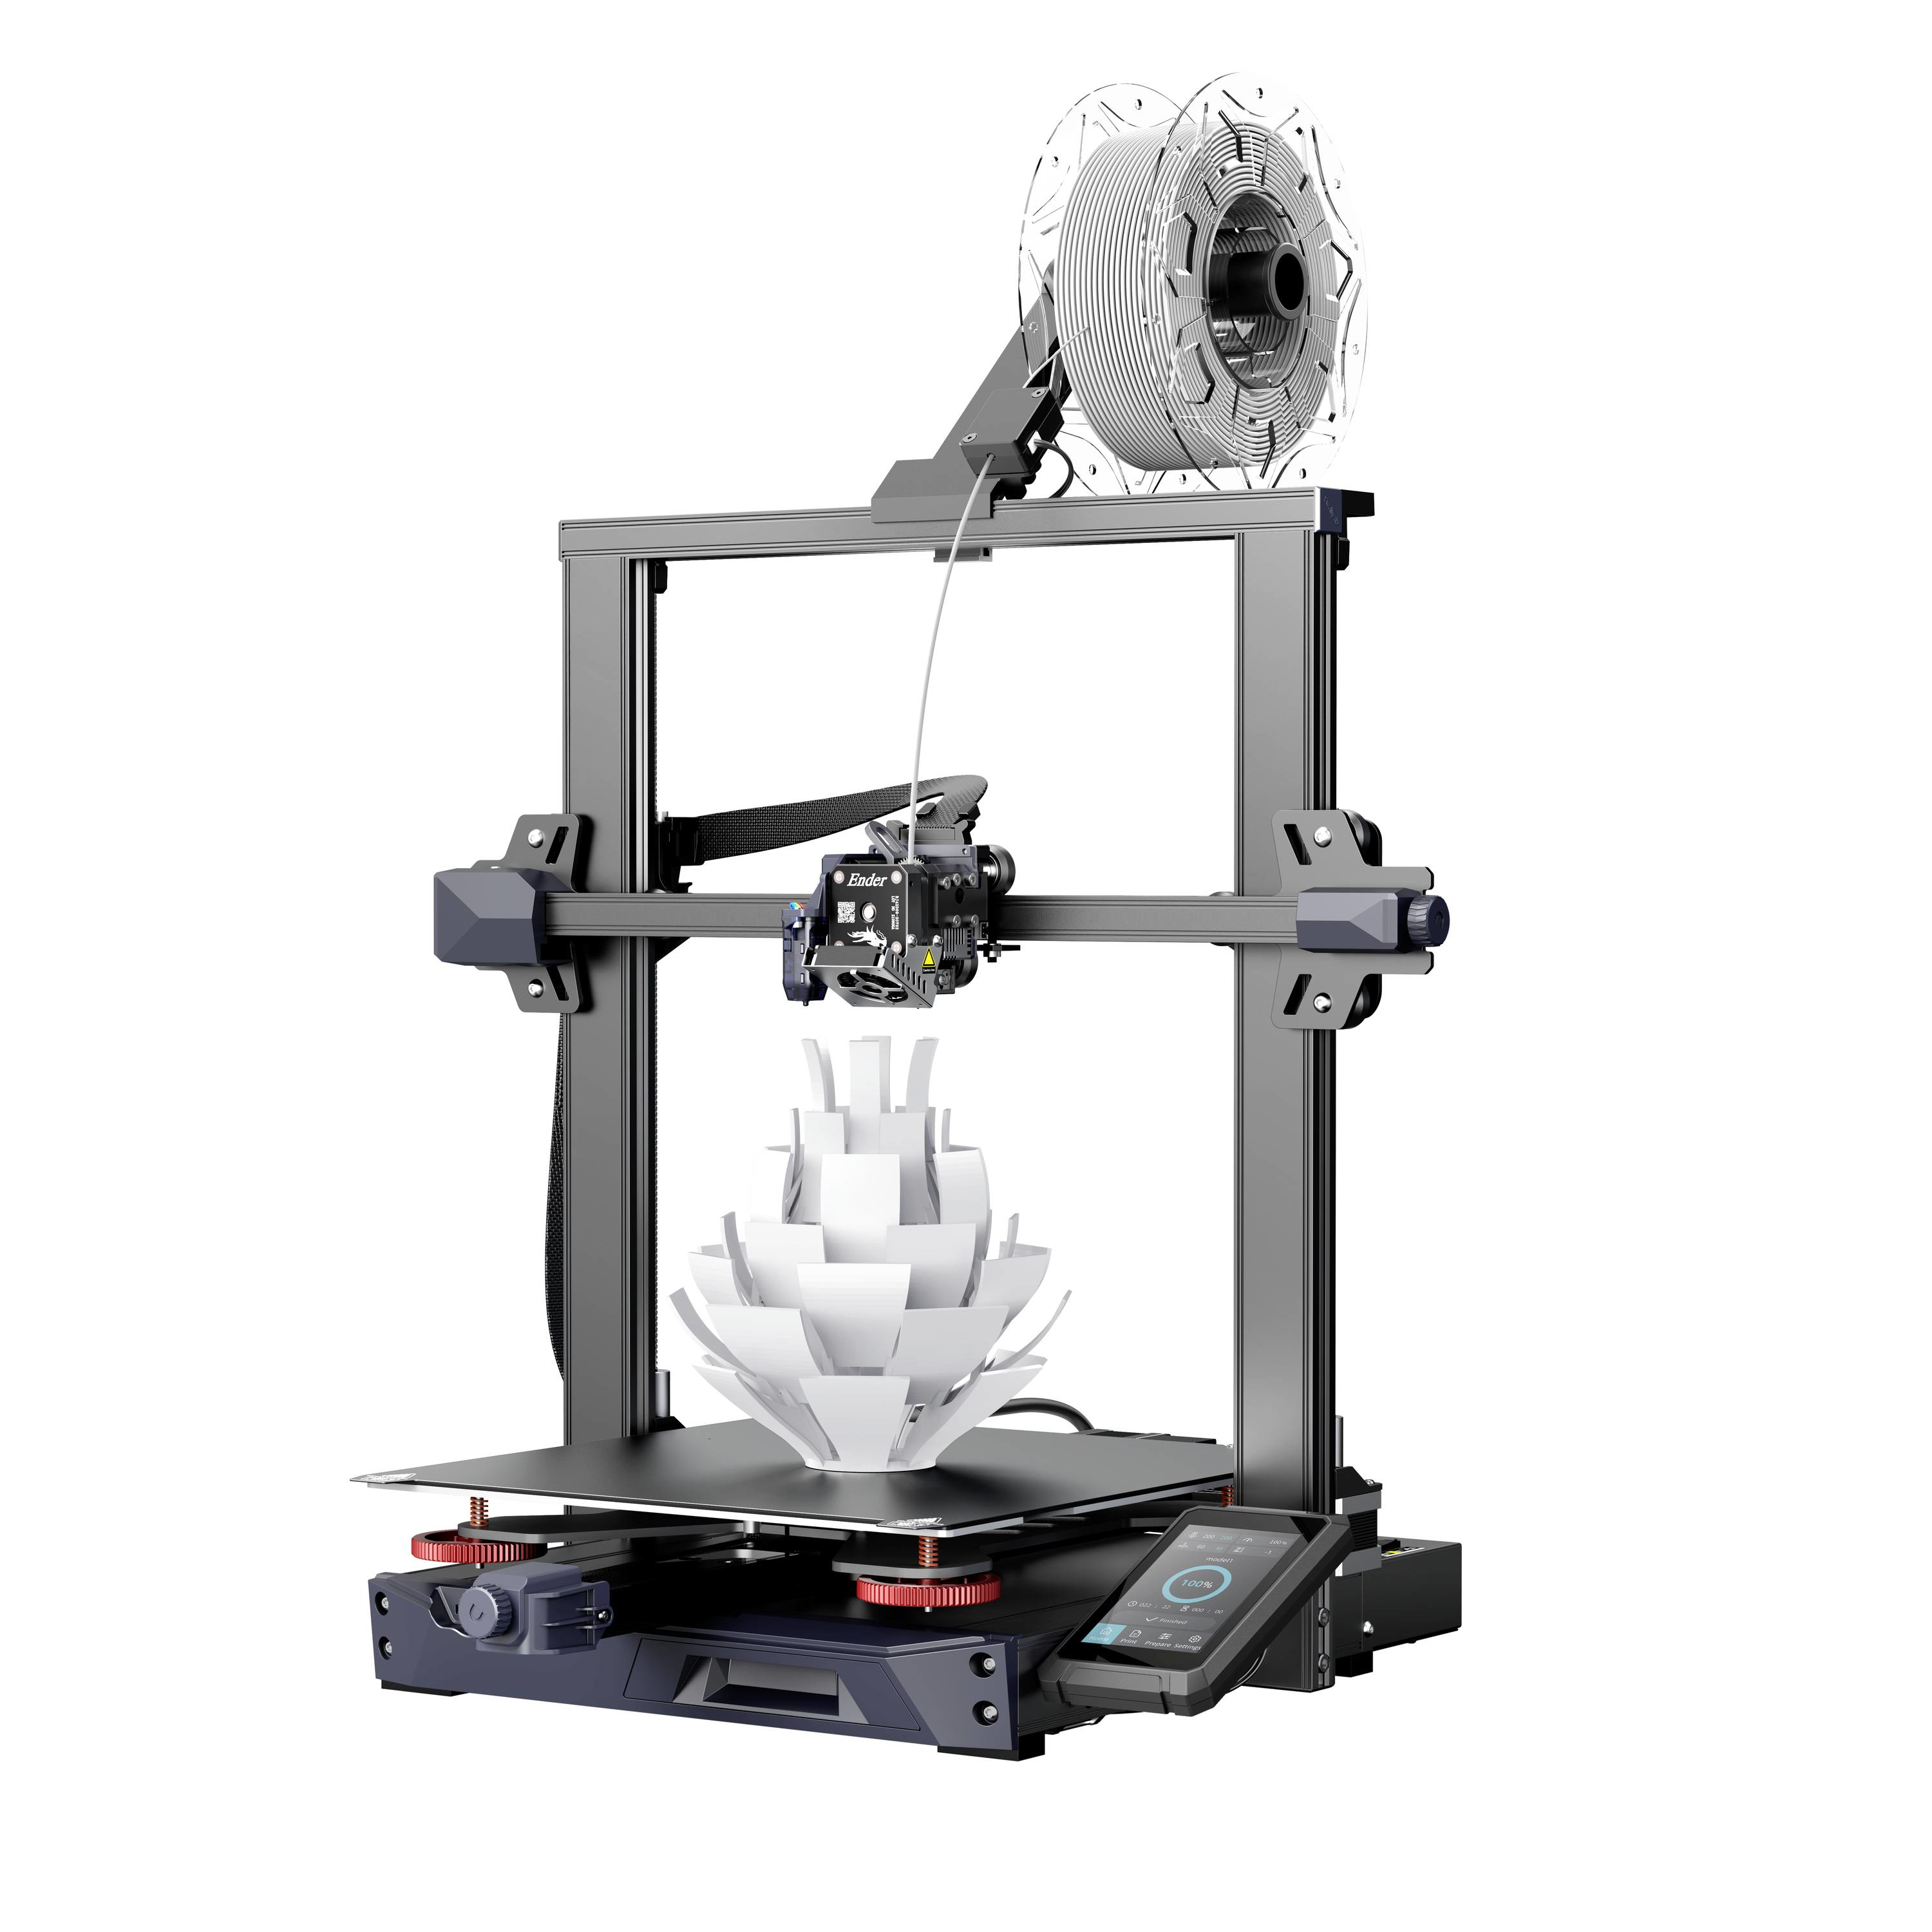 Creality 1001020444  Creality 3D Ender 3 Neo imprimante 3D Fused  Deposition Modeling (FDM)